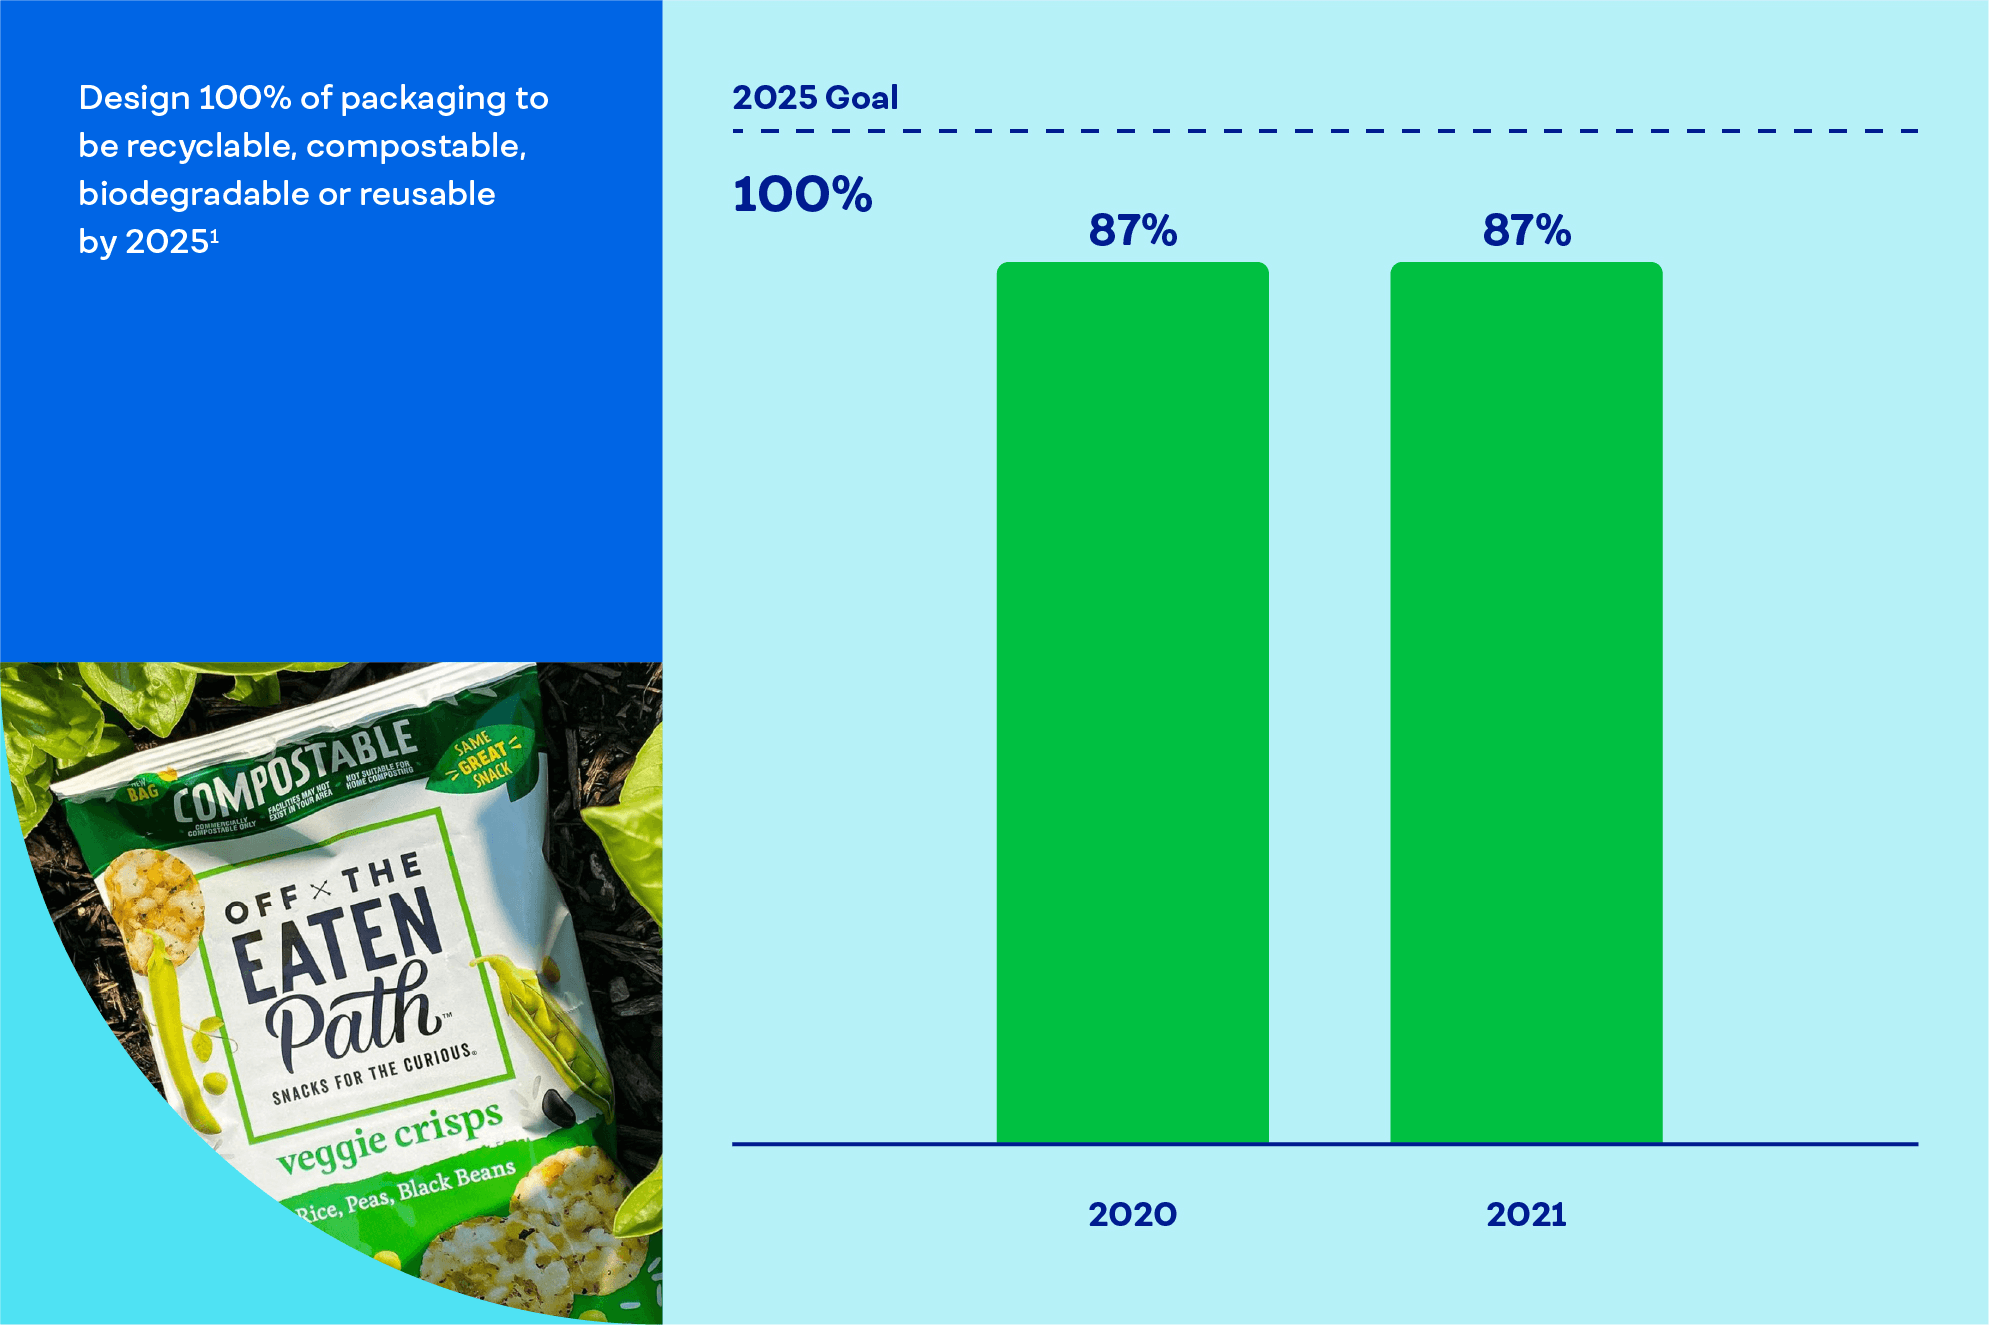 Design 100% of packaging to be recyclable, compostable, biodegradable or reusable by 2025. 2021: 87% [footnote 1]